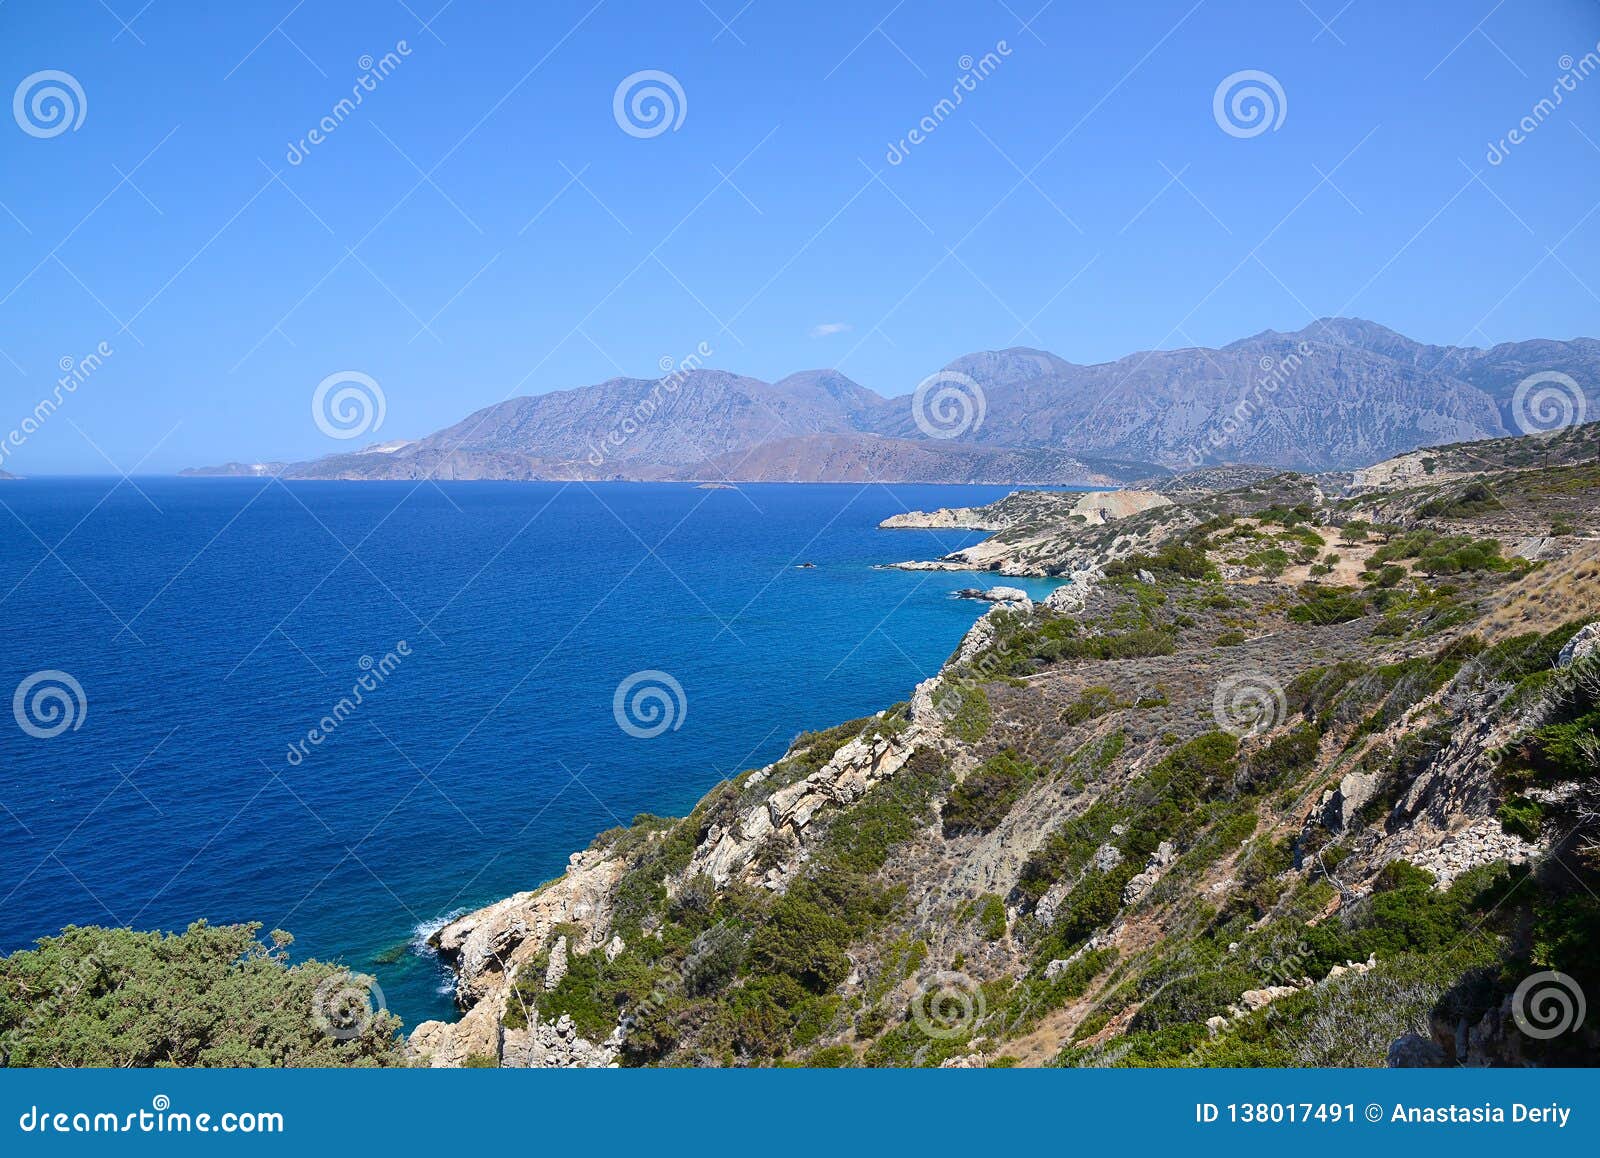 View of the Mountains and the Mediterranean Sea, Crete, Greece